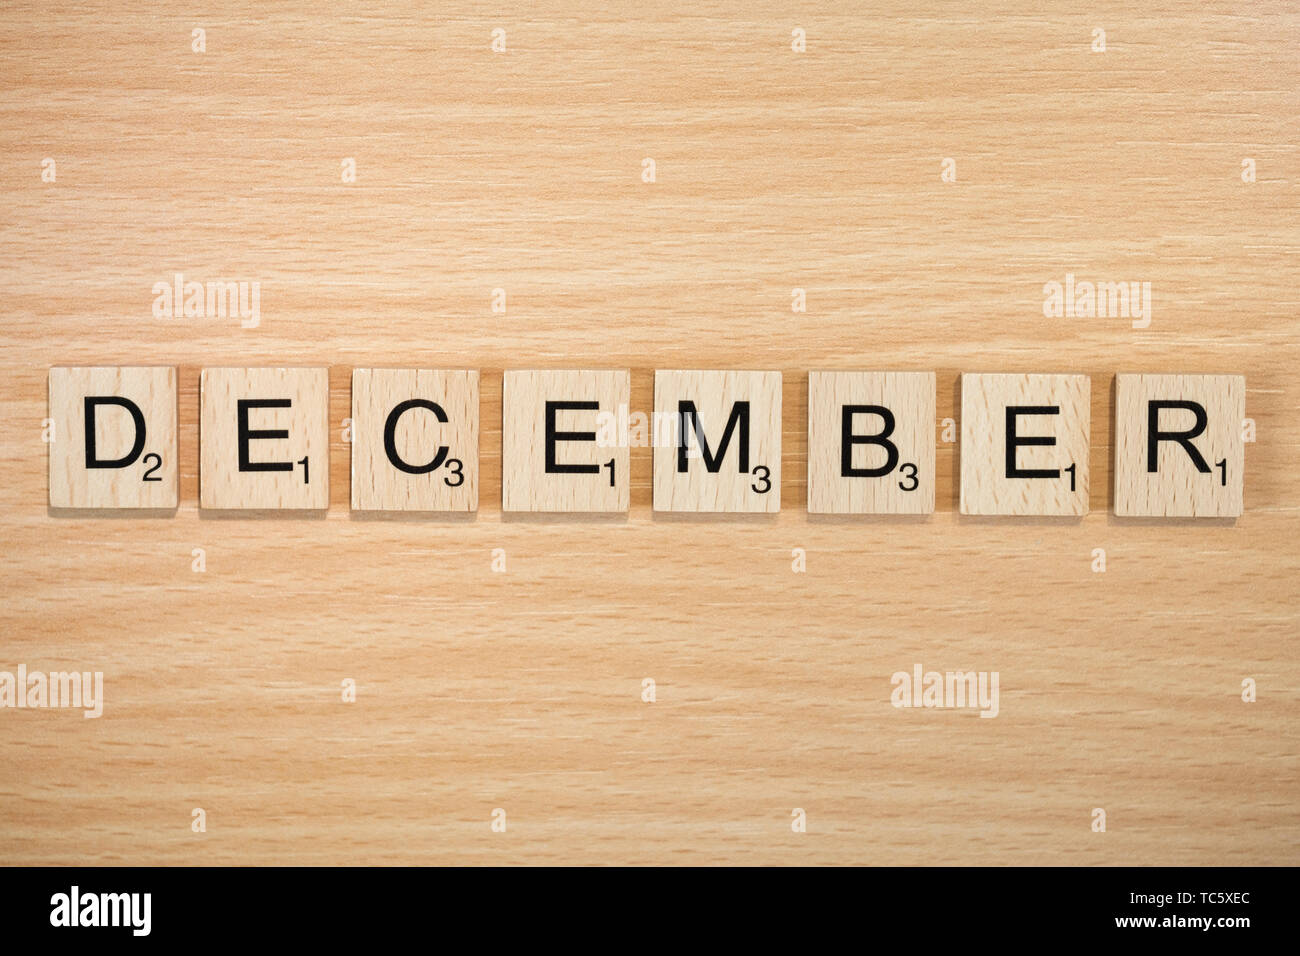 The word December, spelt out using wooden tiles on a wood effect background with scrabble numbered score values. Stock Photo